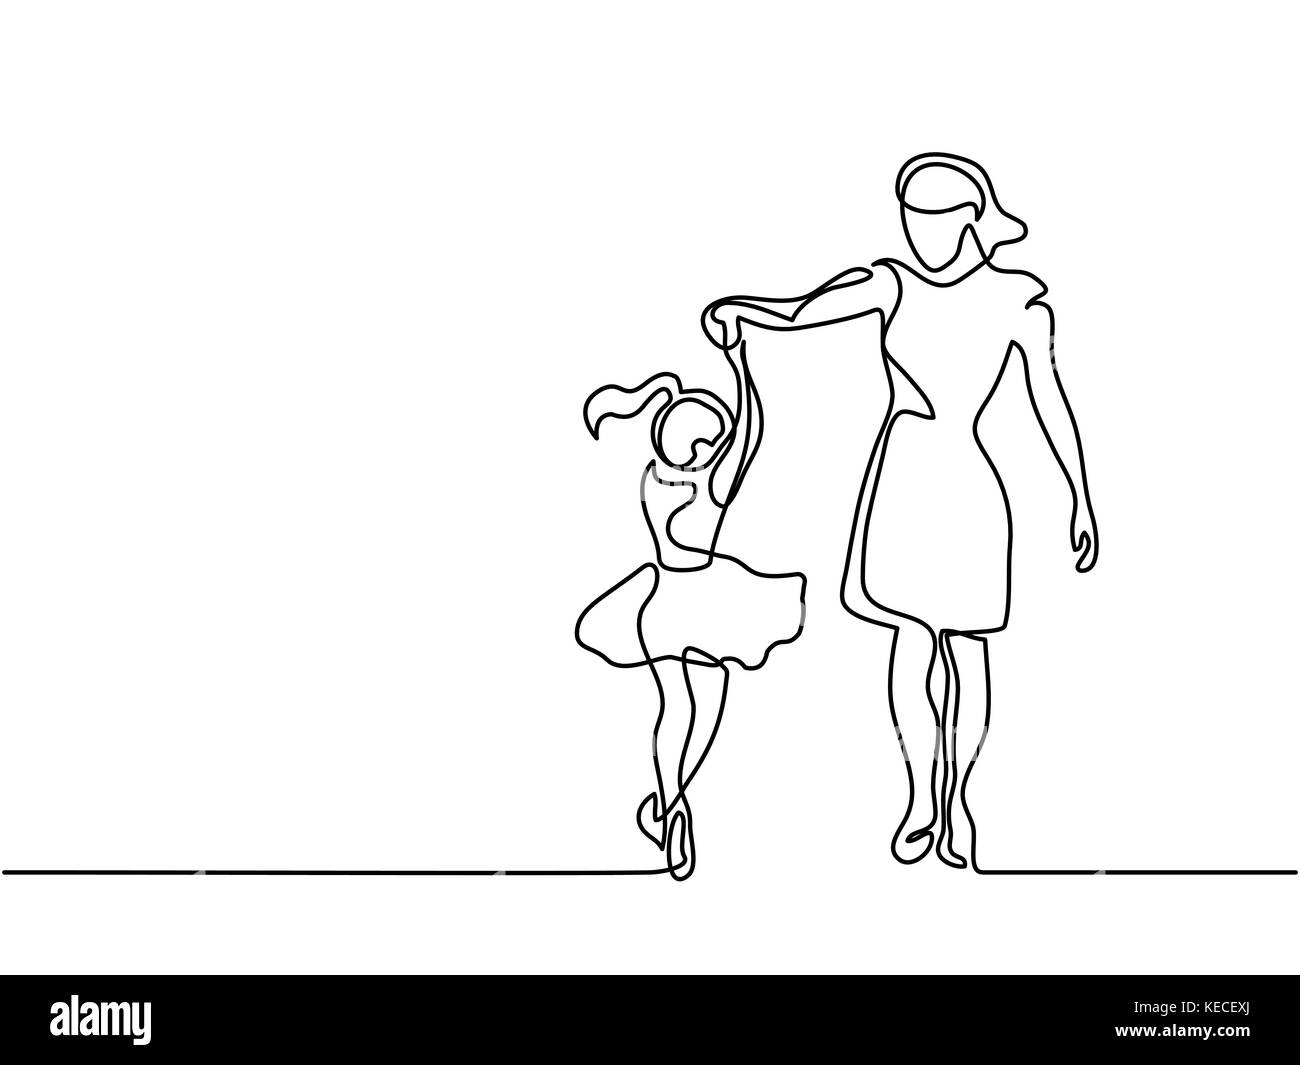 Mom daughter dance Stock Vector Images - Alamy